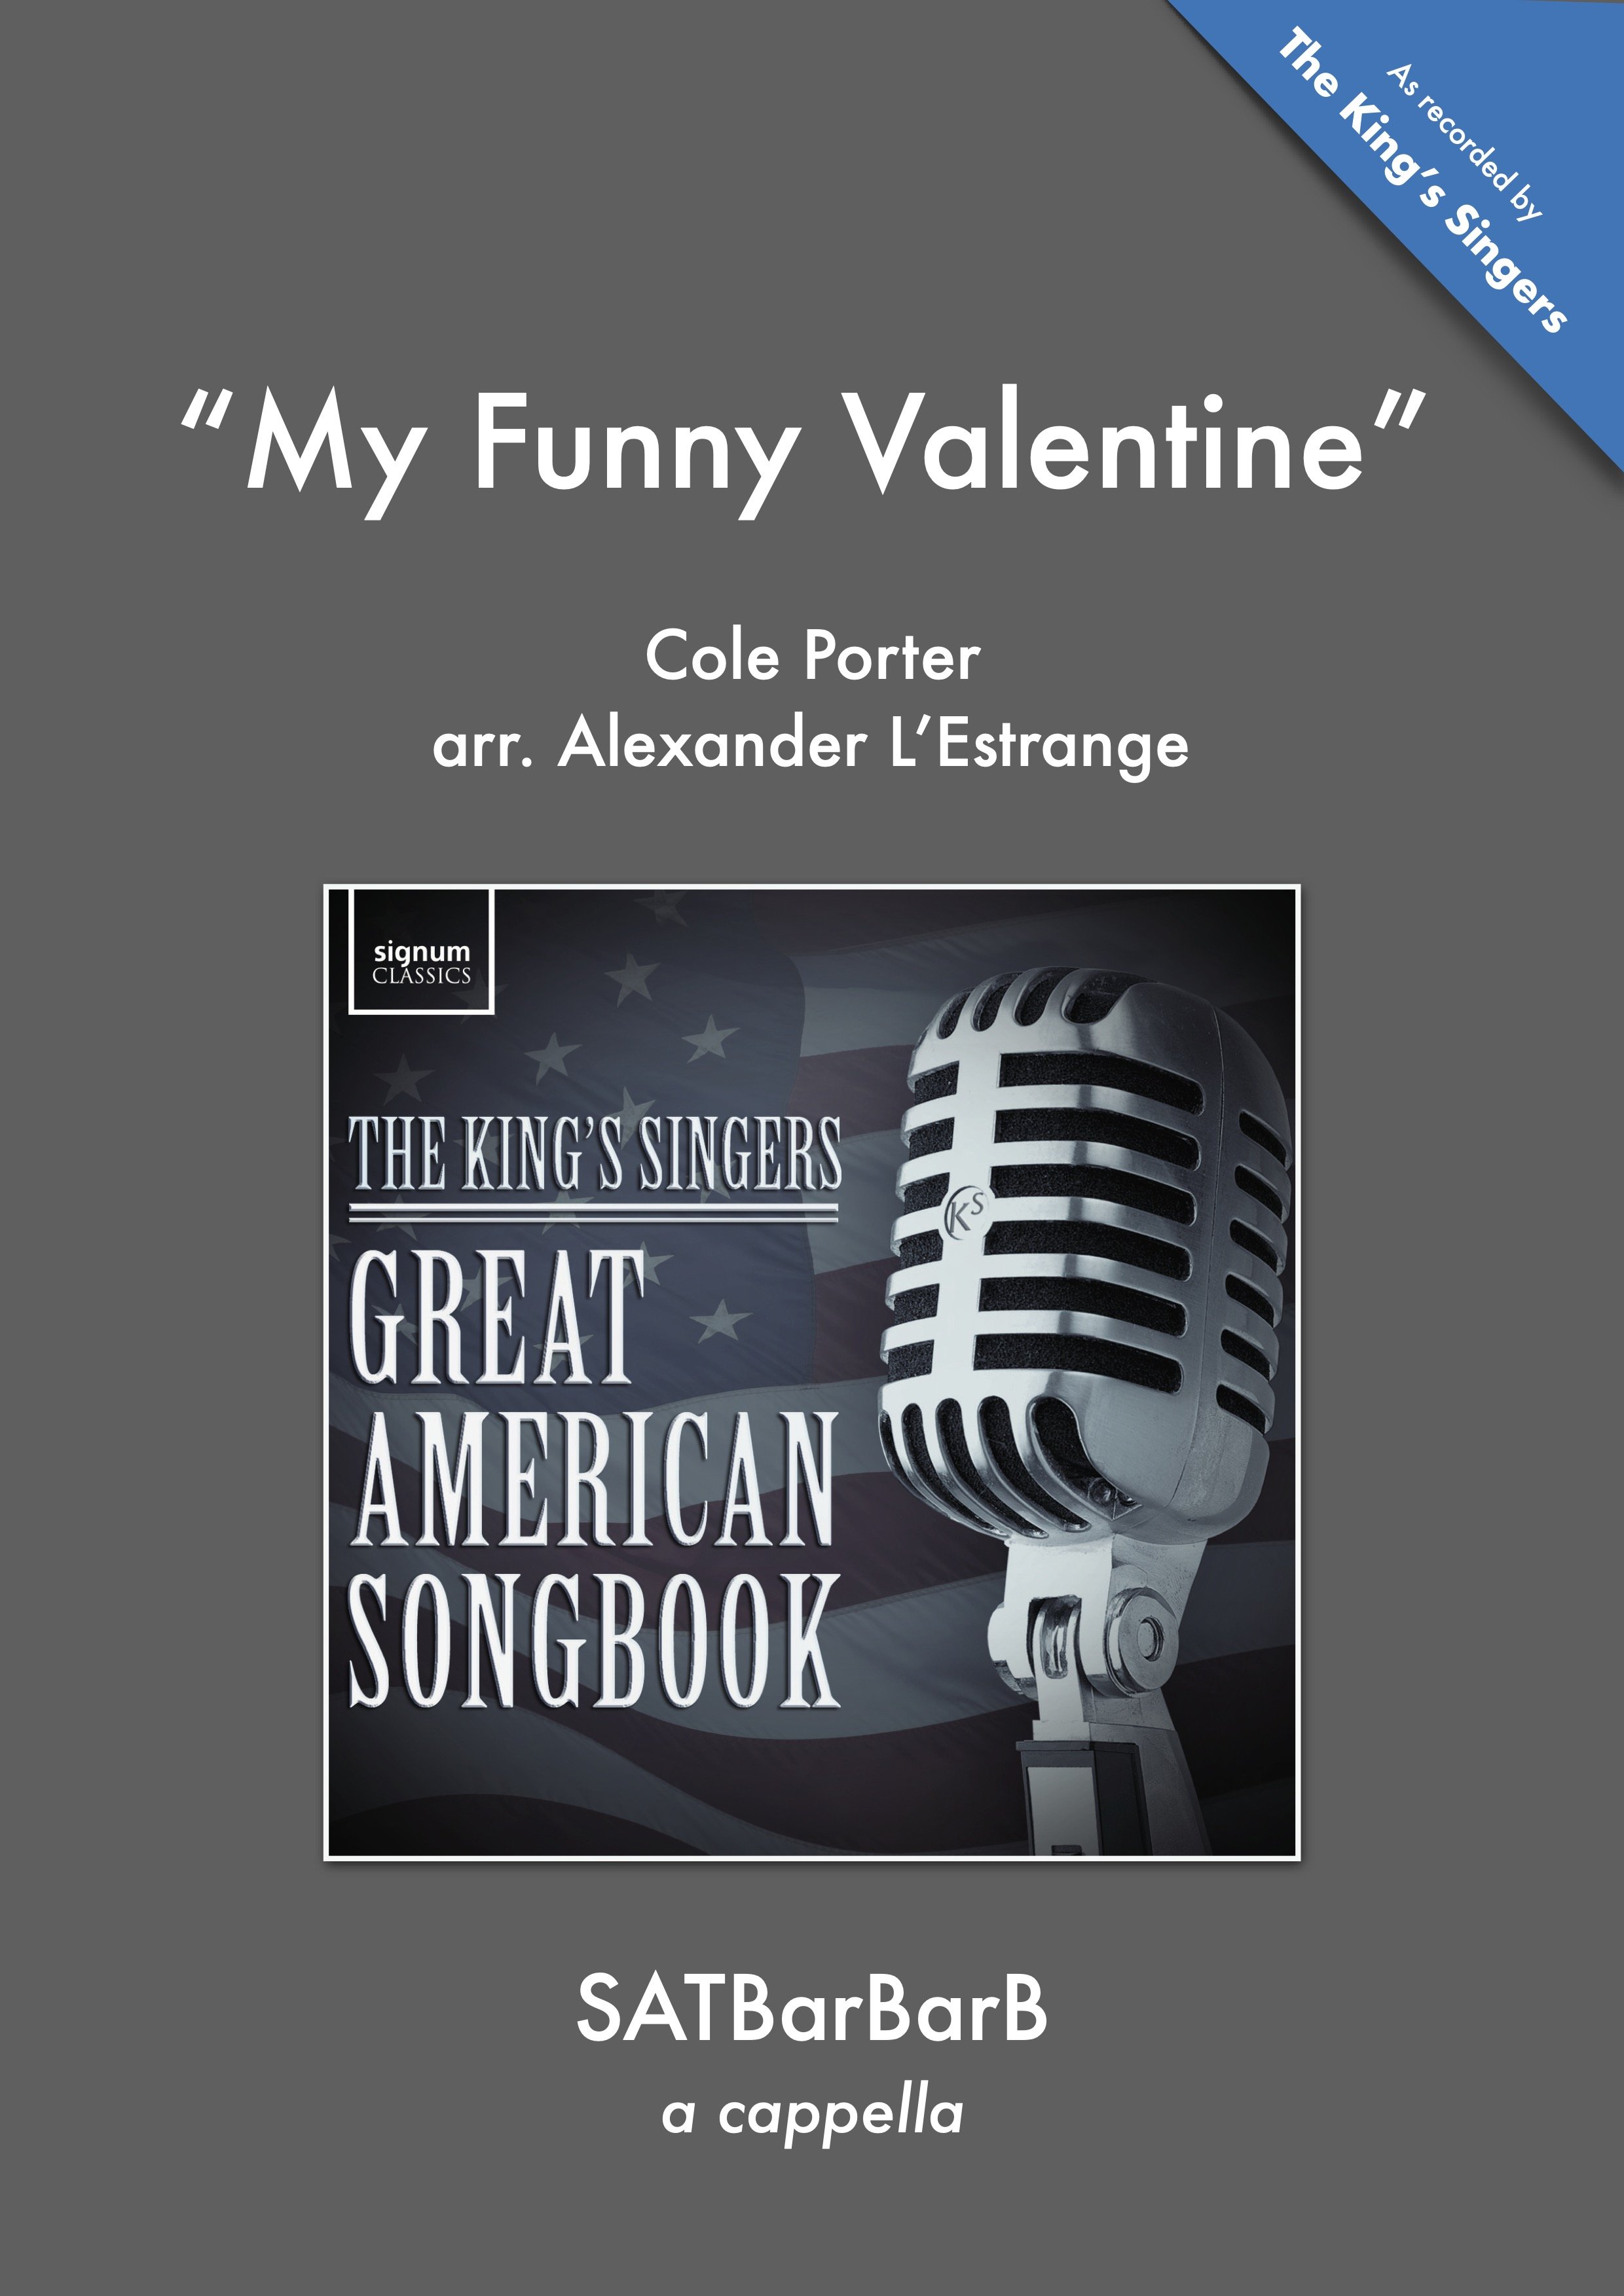 My Funny Valentine (King's Singers version)